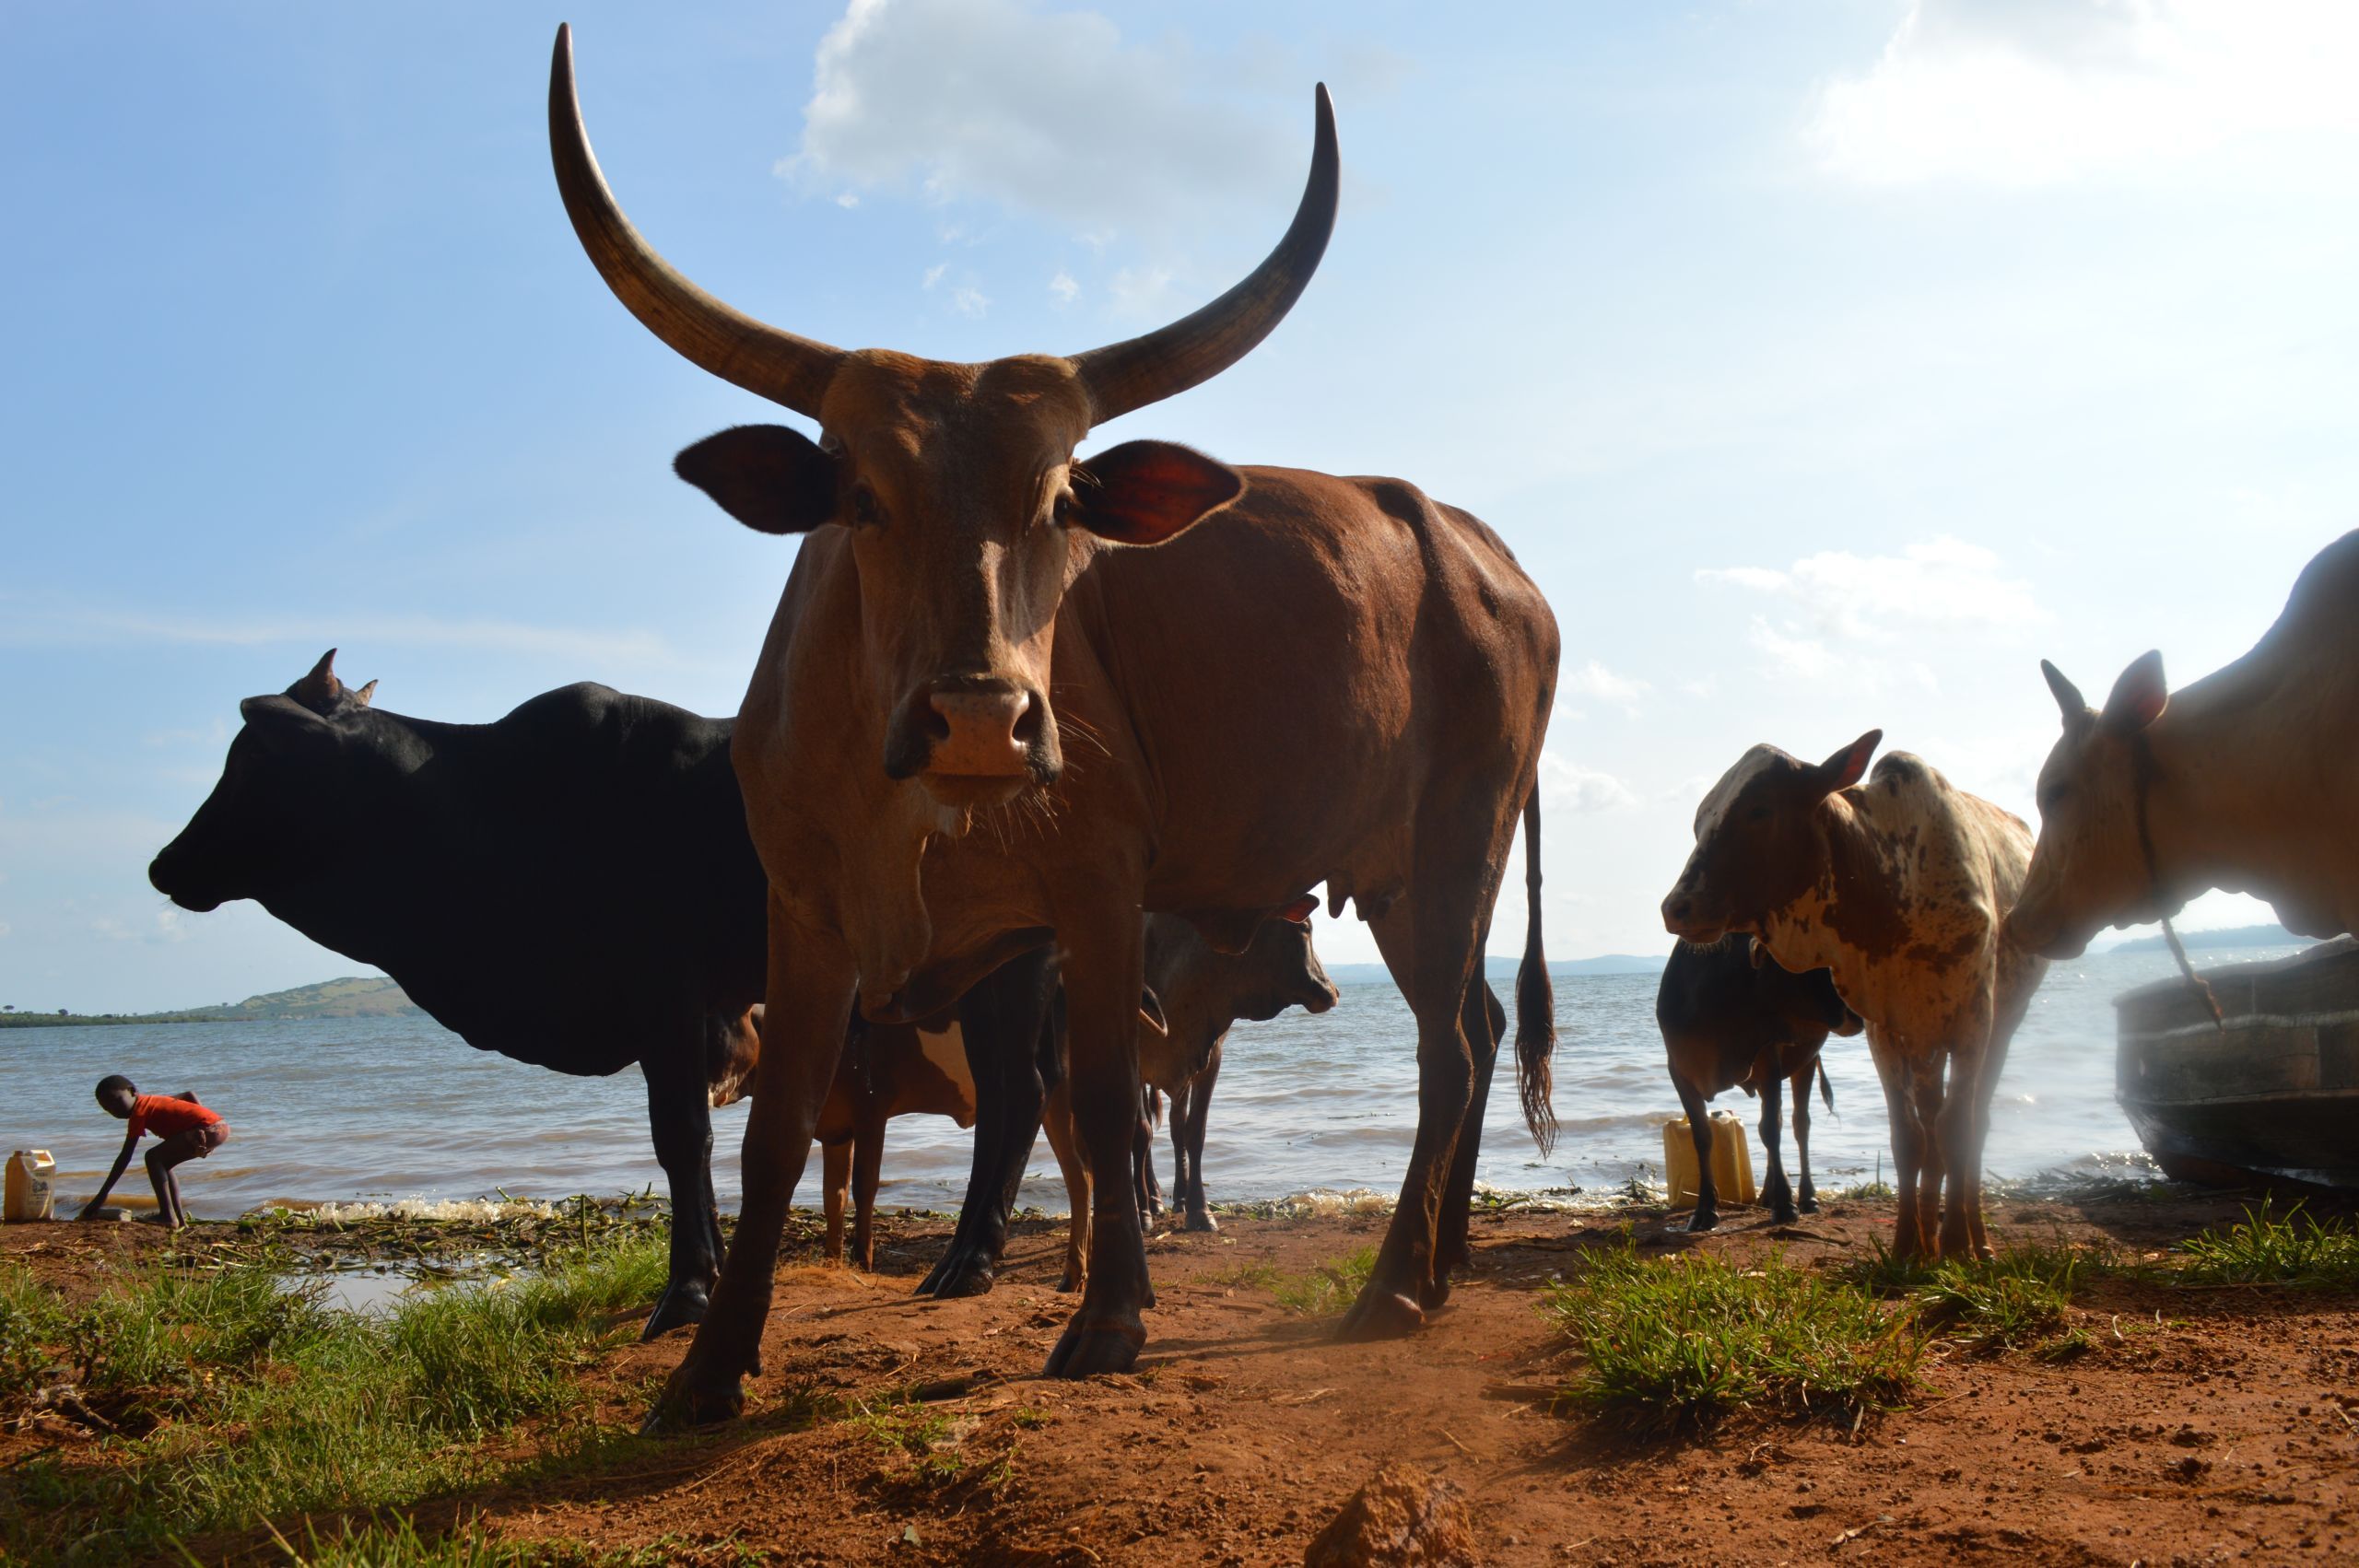 Cows coming in from the storm at Nakalanga village. Finding grazing land for their cattle is one of the farmers' biggest challenges. Image by Annika McGinnis. Uganda, 2019. 